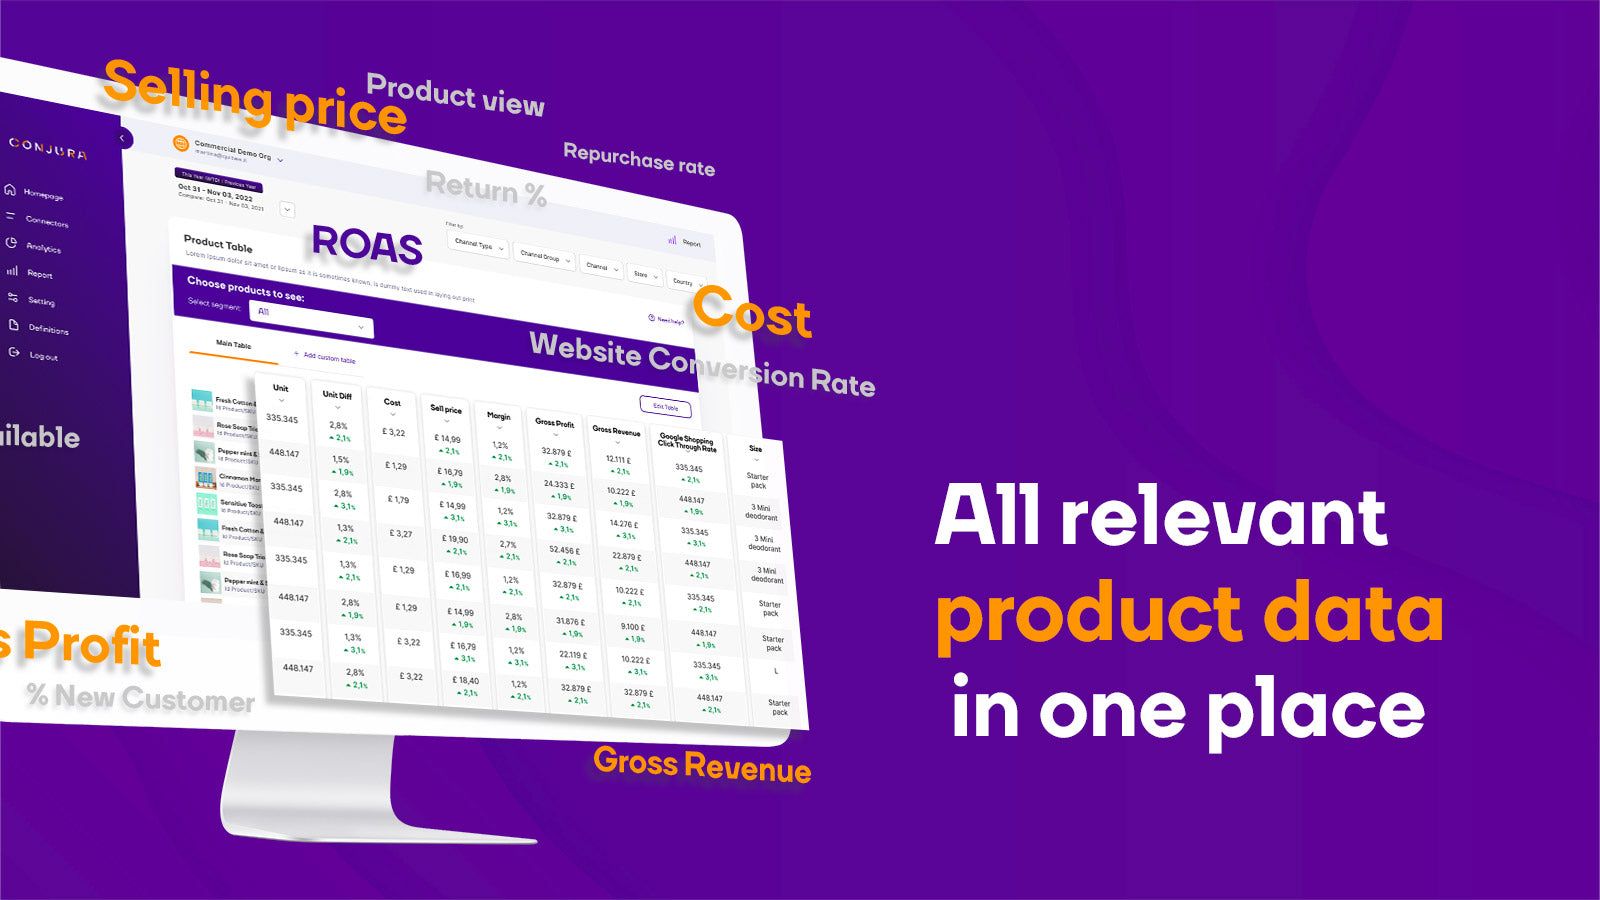 Where all relevant product data comes together in one place